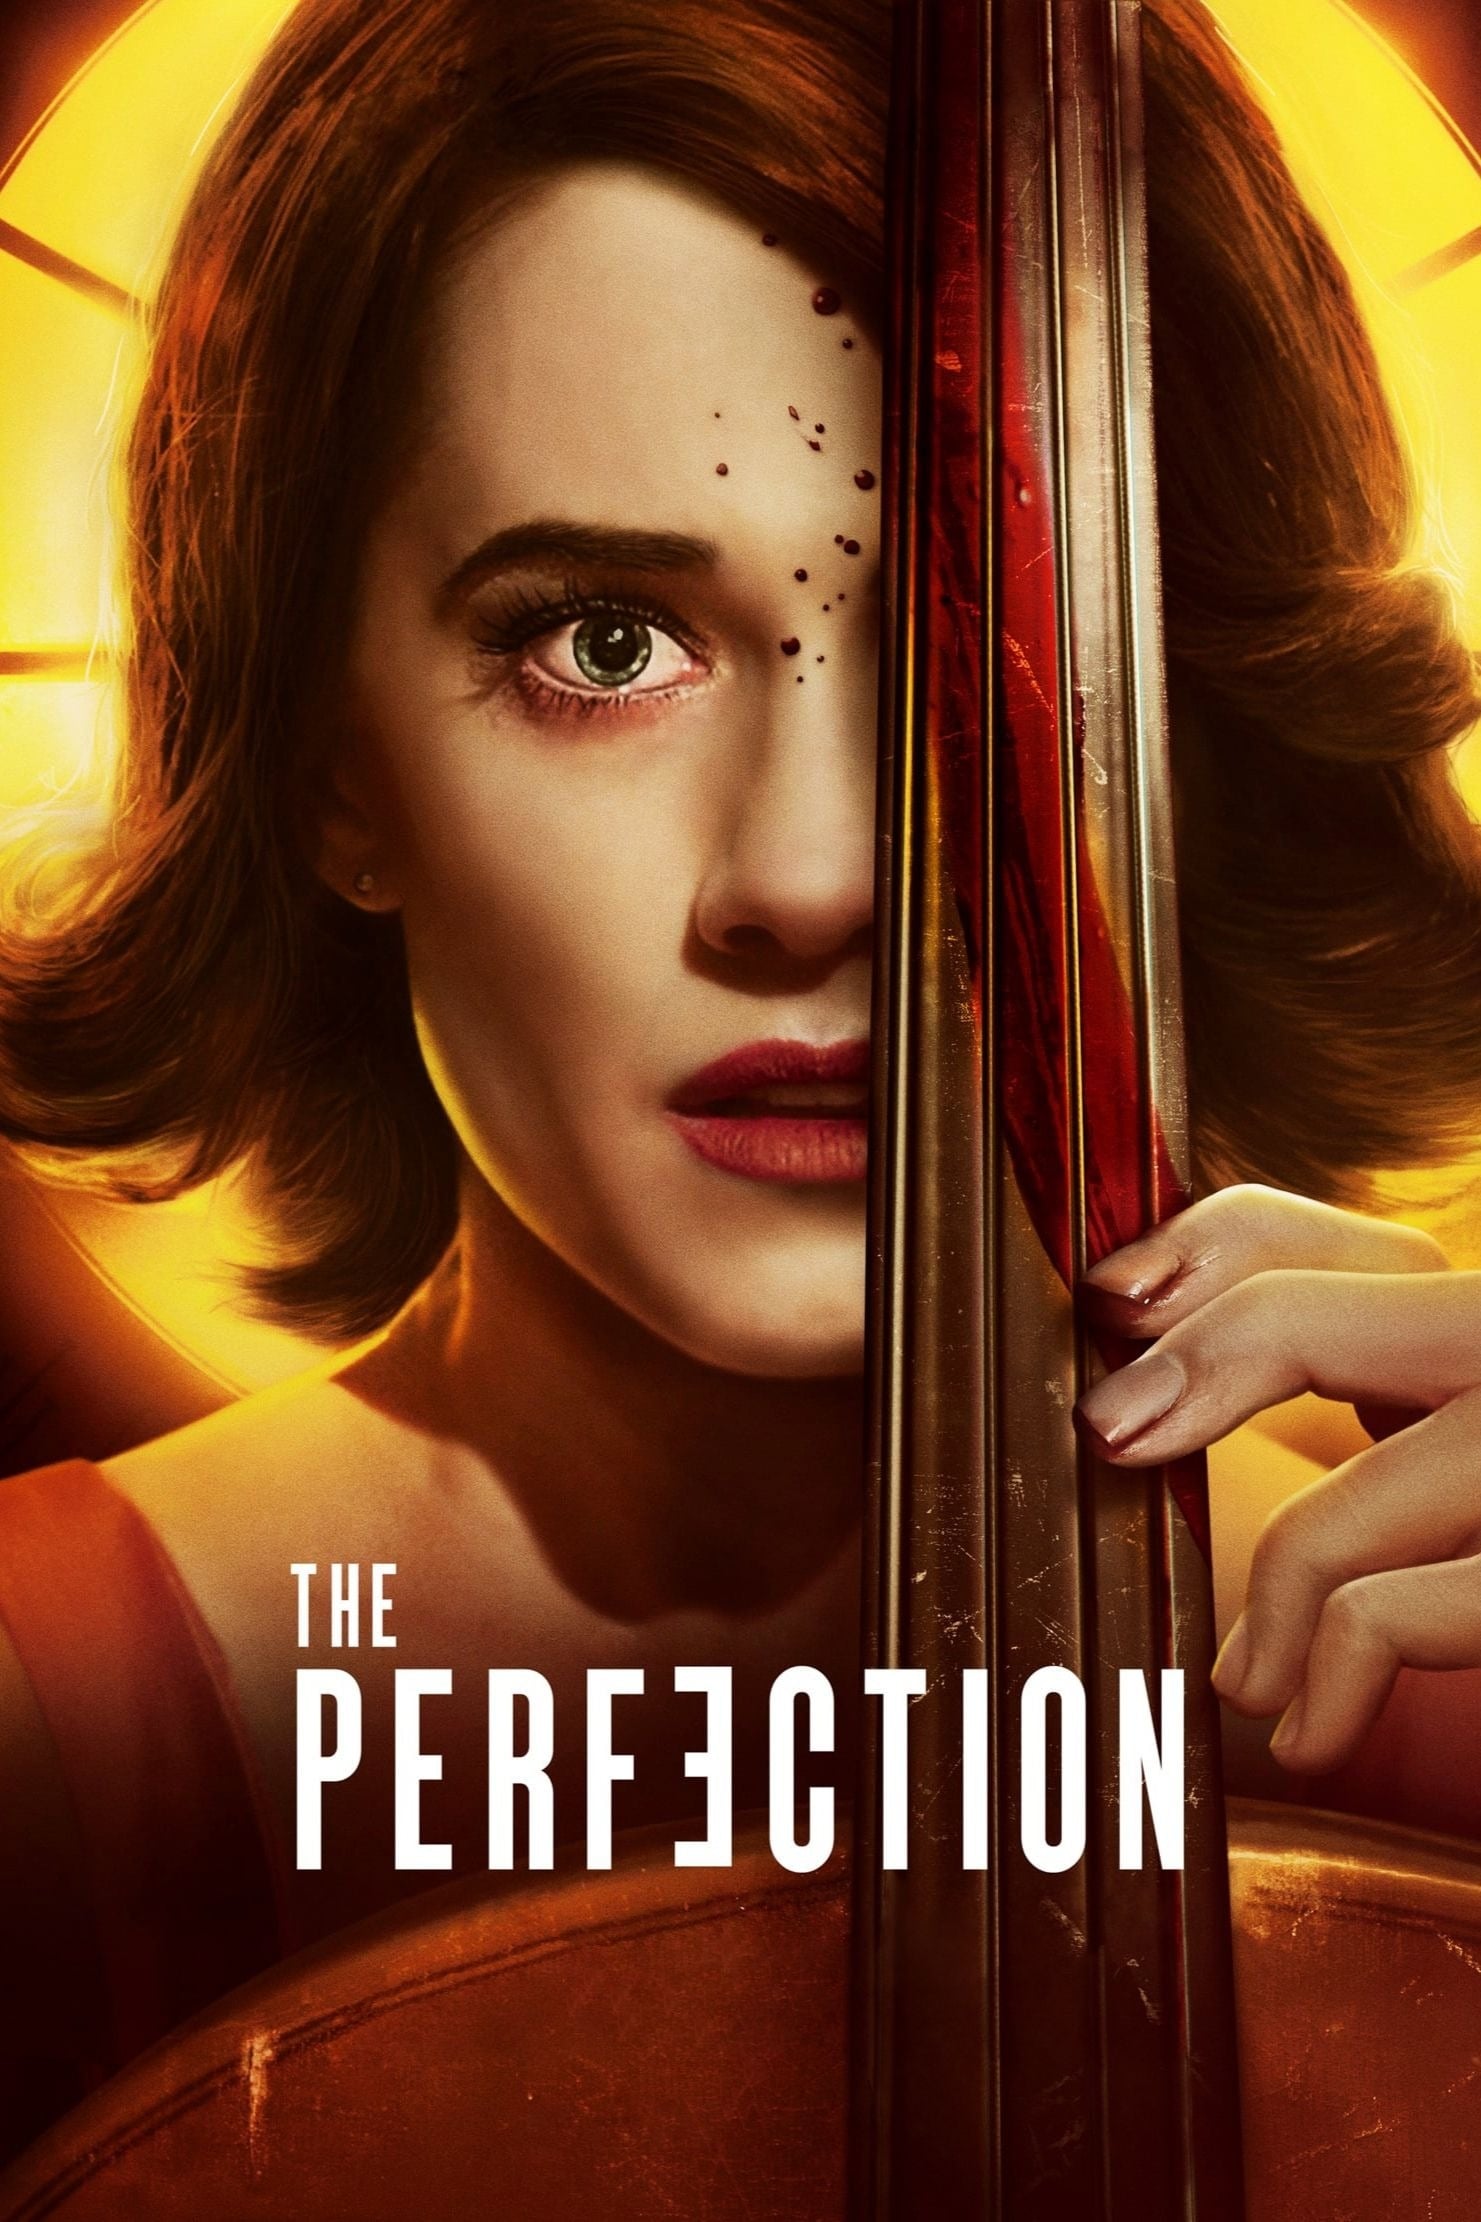 The Perfection [HD] (2018)